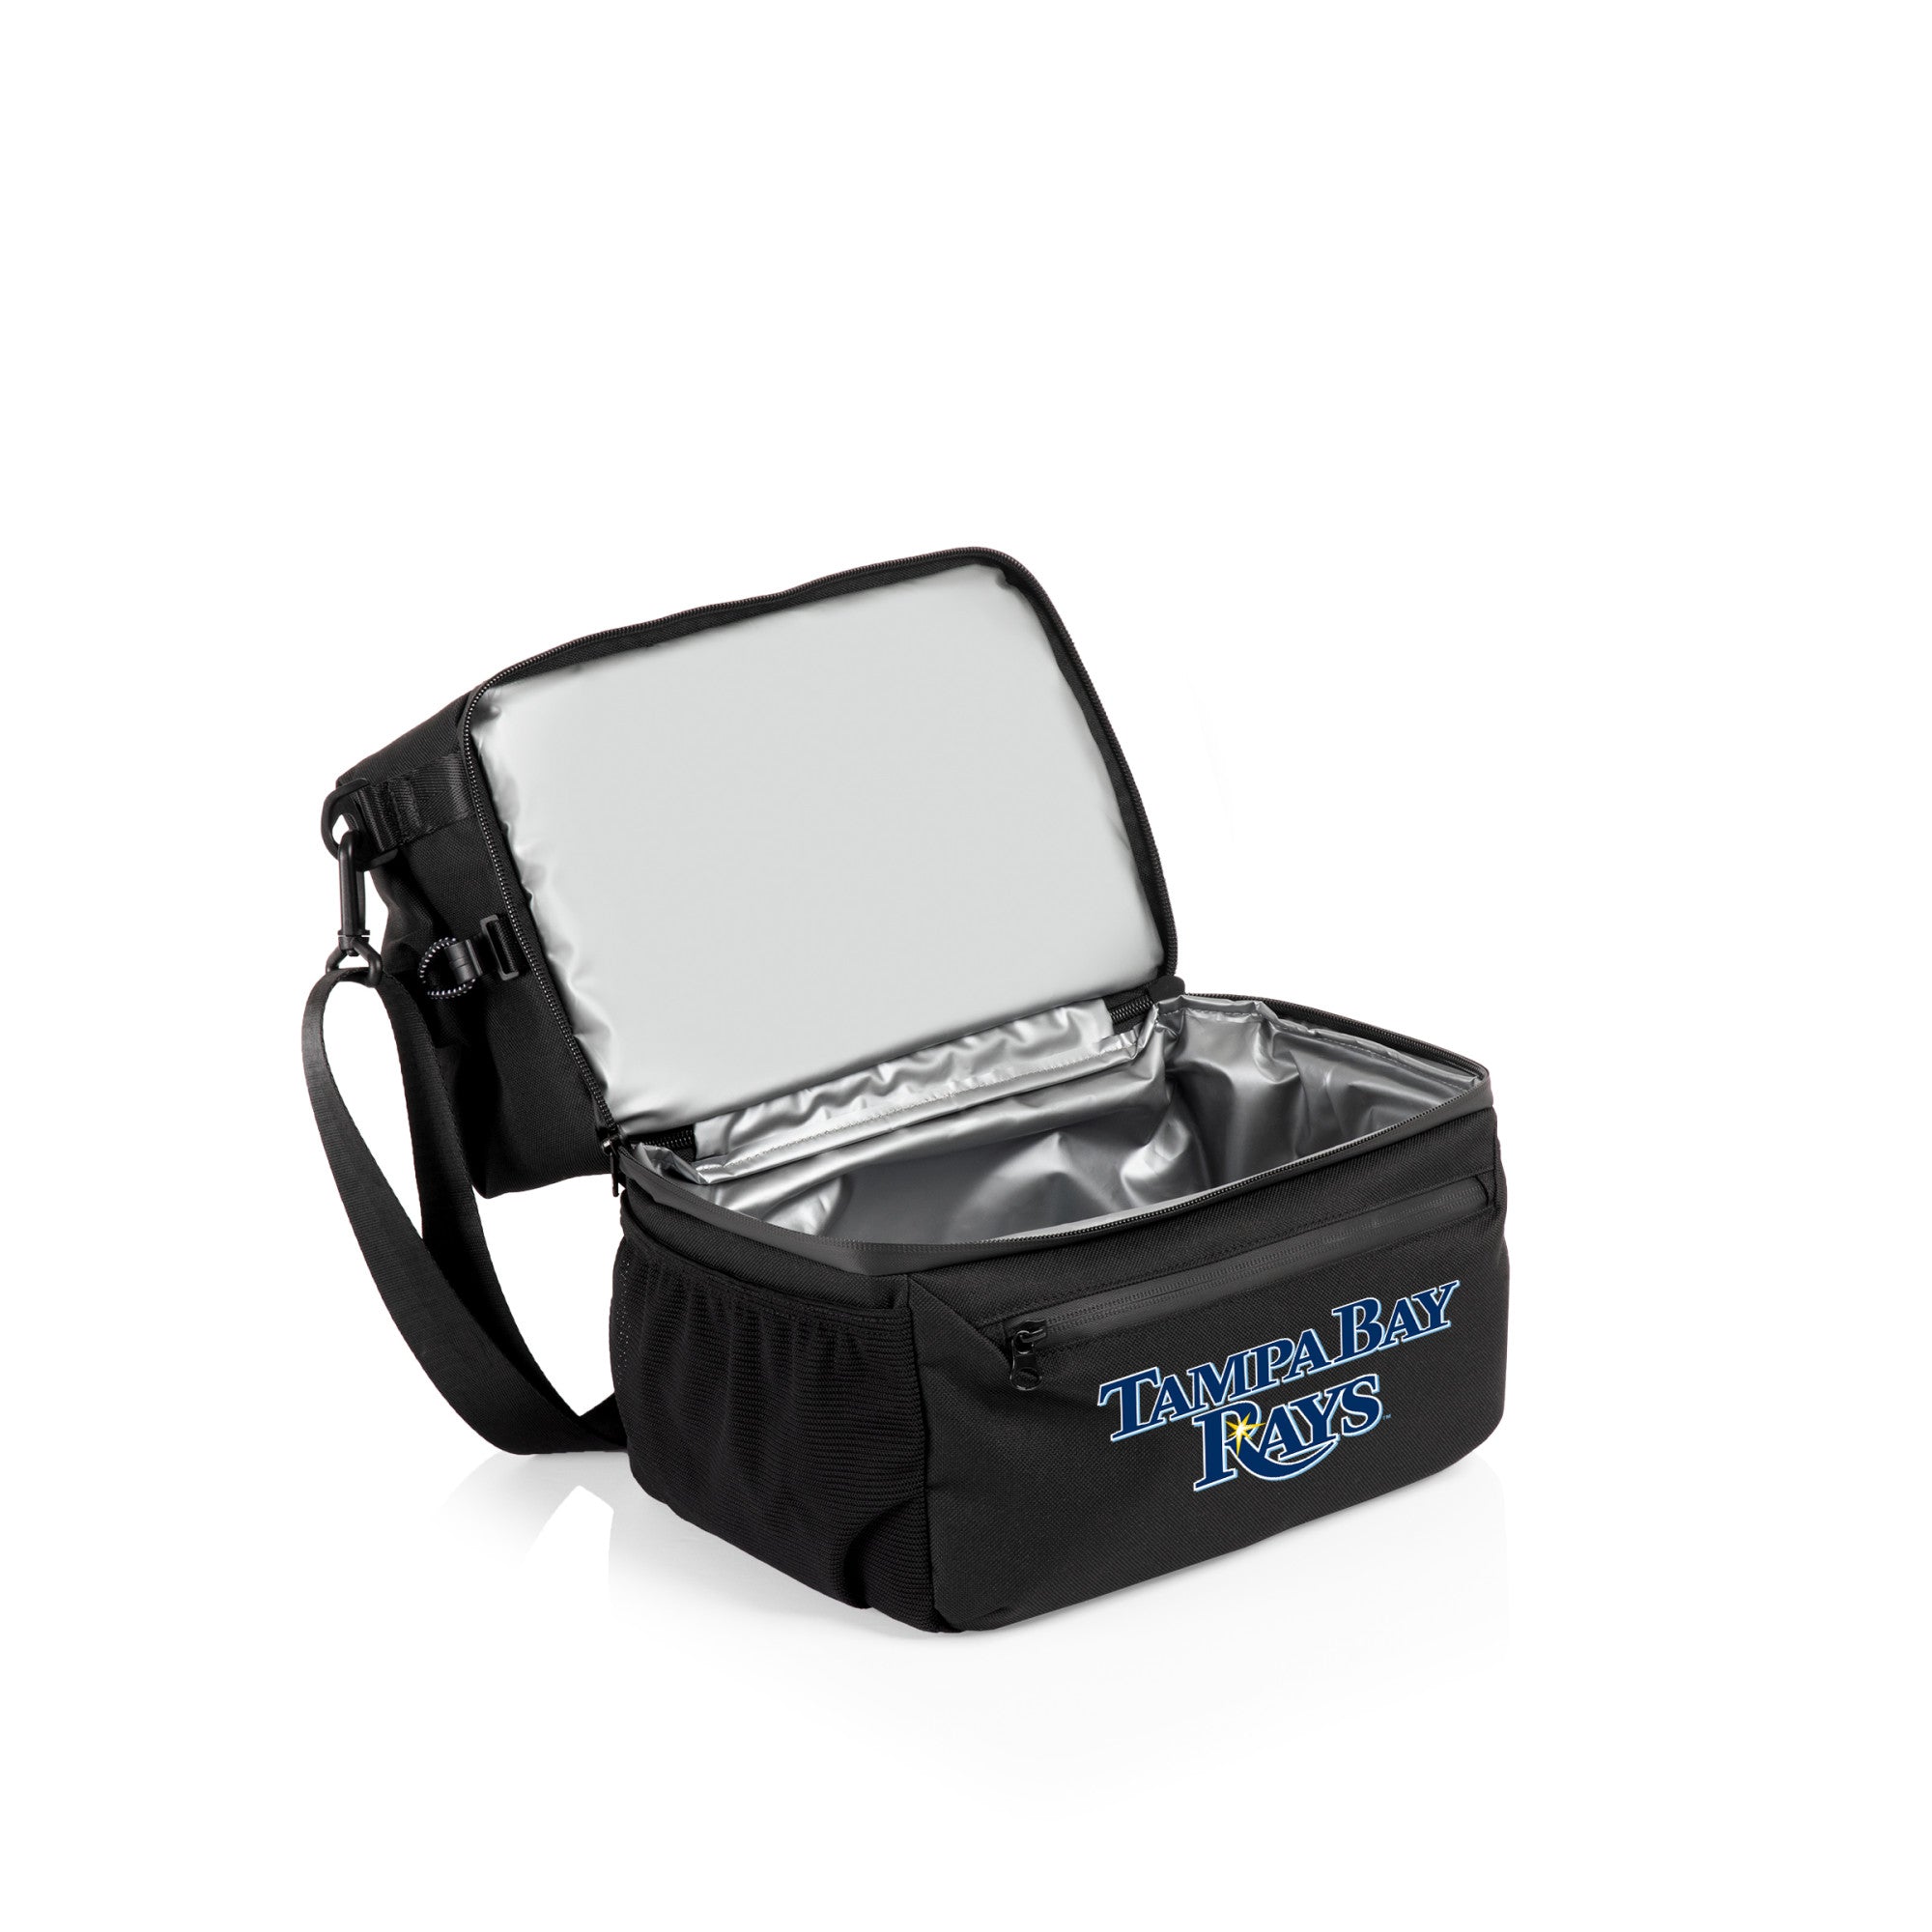 Tampa Bay Rays - Tarana Lunch Bag Cooler with Utensils